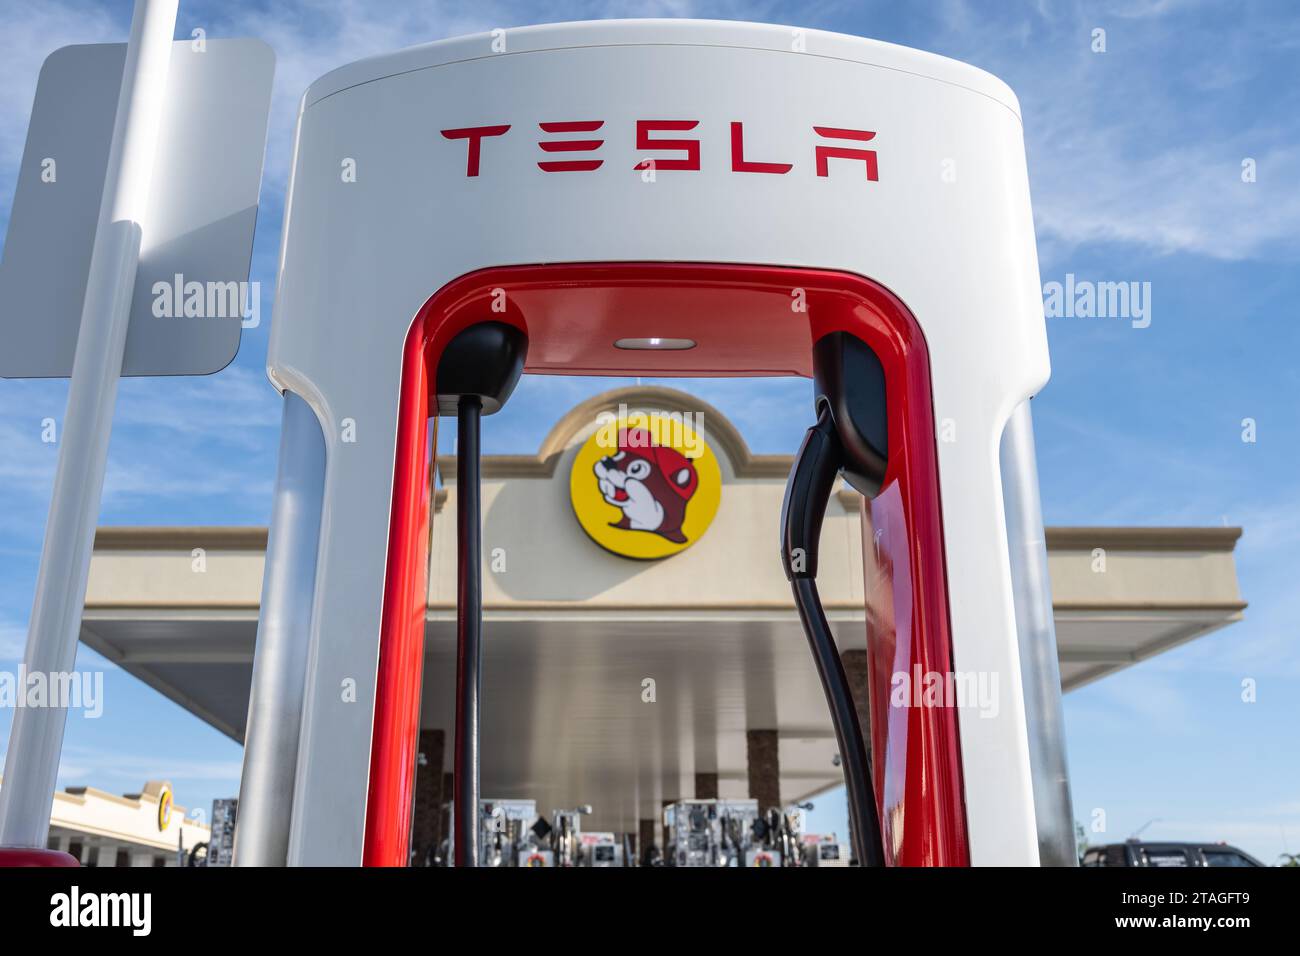 Tesla EV Supercharger at the Buc-ees travel center fueling station along I-95 in Daytona Beach, Florida. (USA) Stock Photo